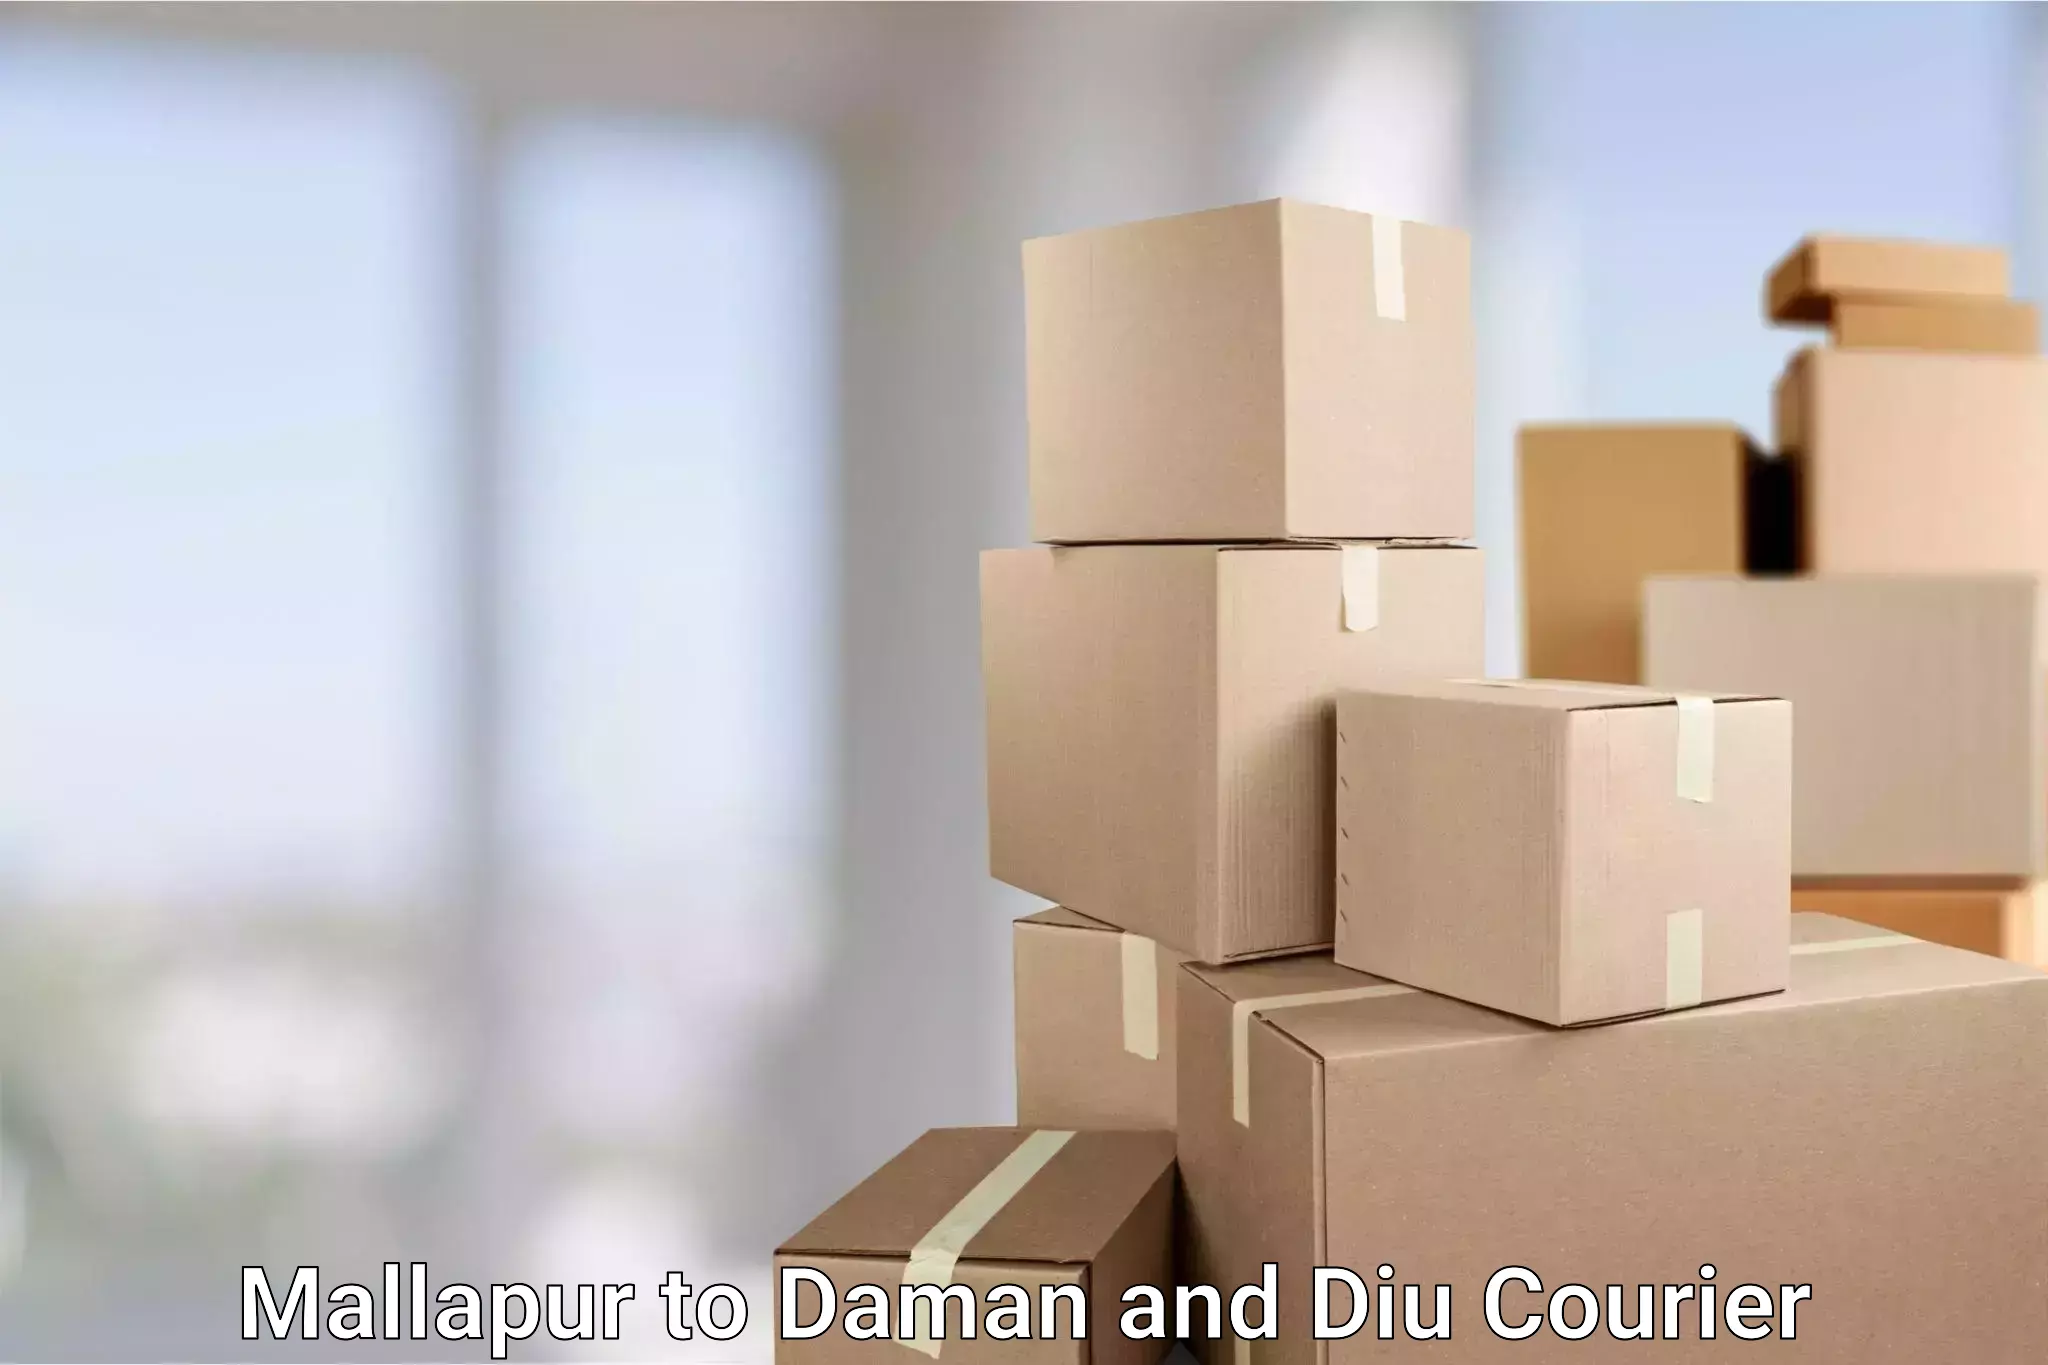 Multi-national courier services Mallapur to Daman